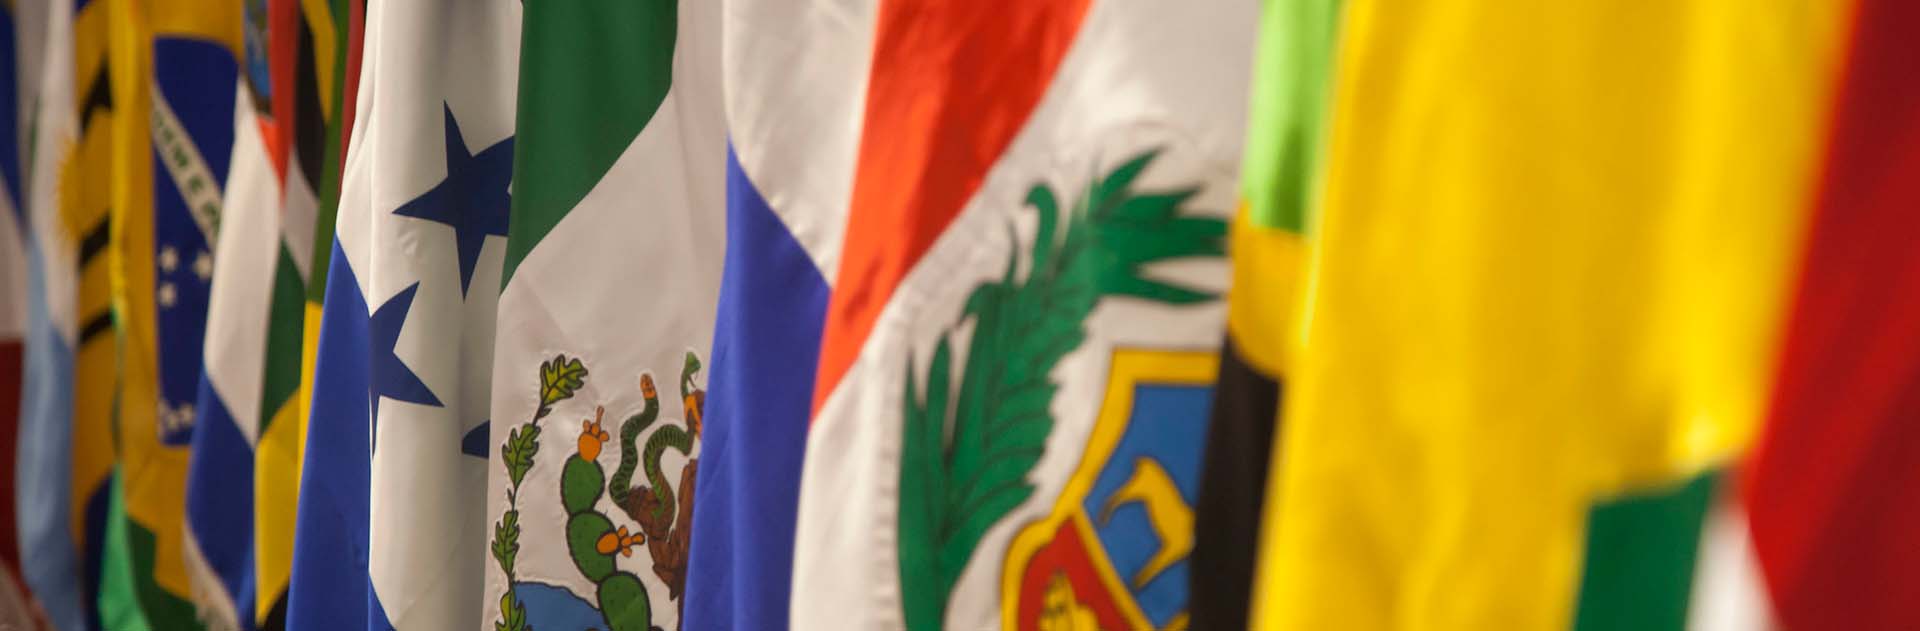 Image of flags of Latin American countries at the CELAC preparatory meeting in Quito, Ecuador (2015). Gaza crisis